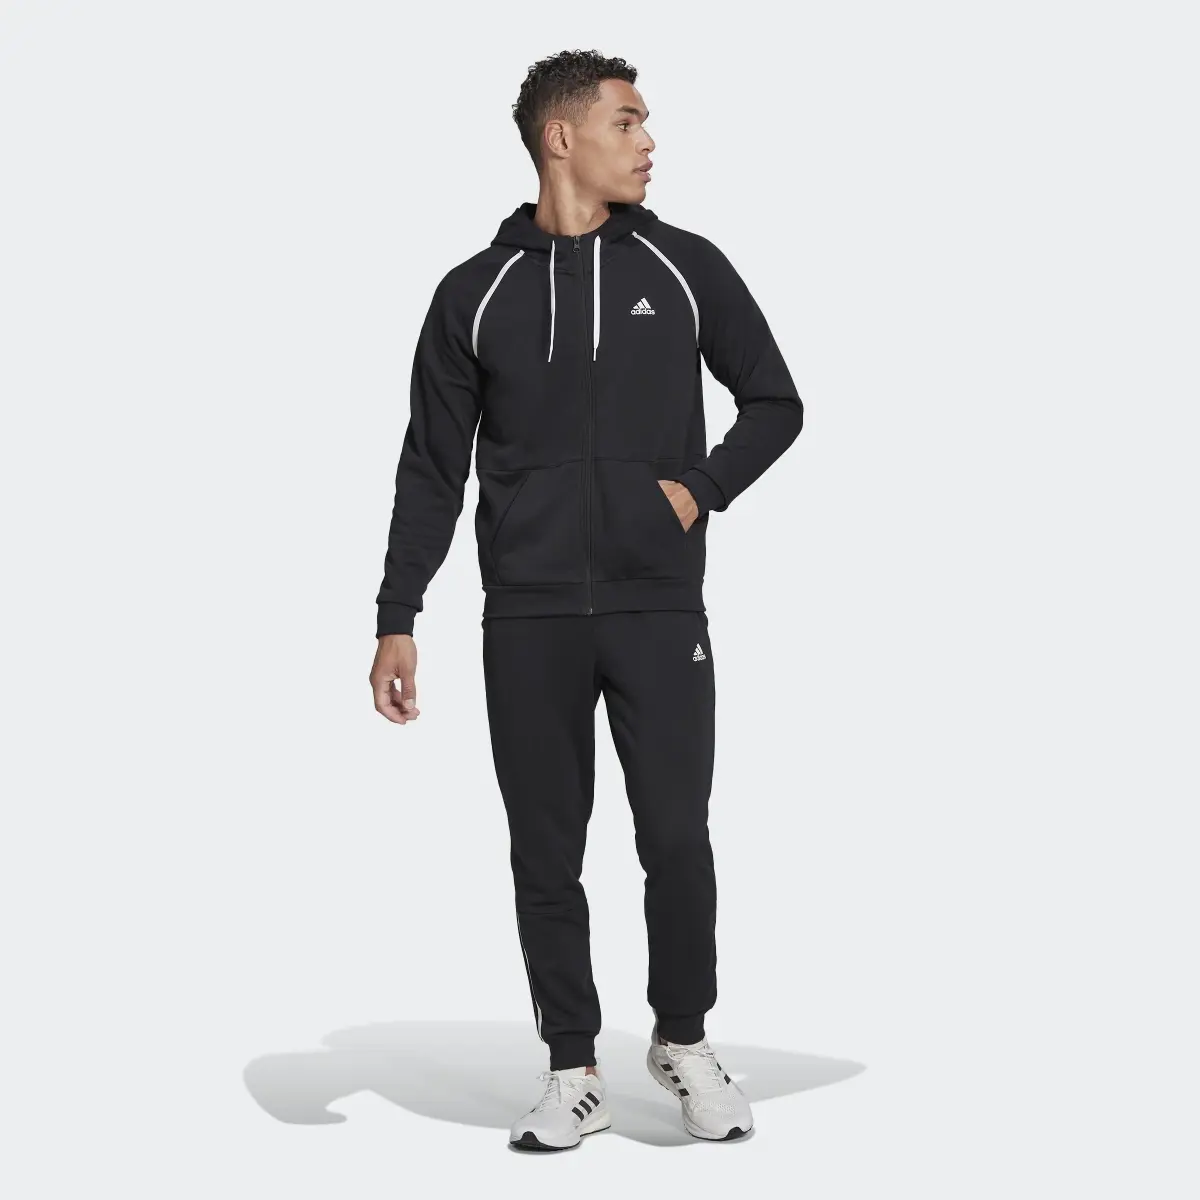 Adidas Cotton Piping Track Suit. 2